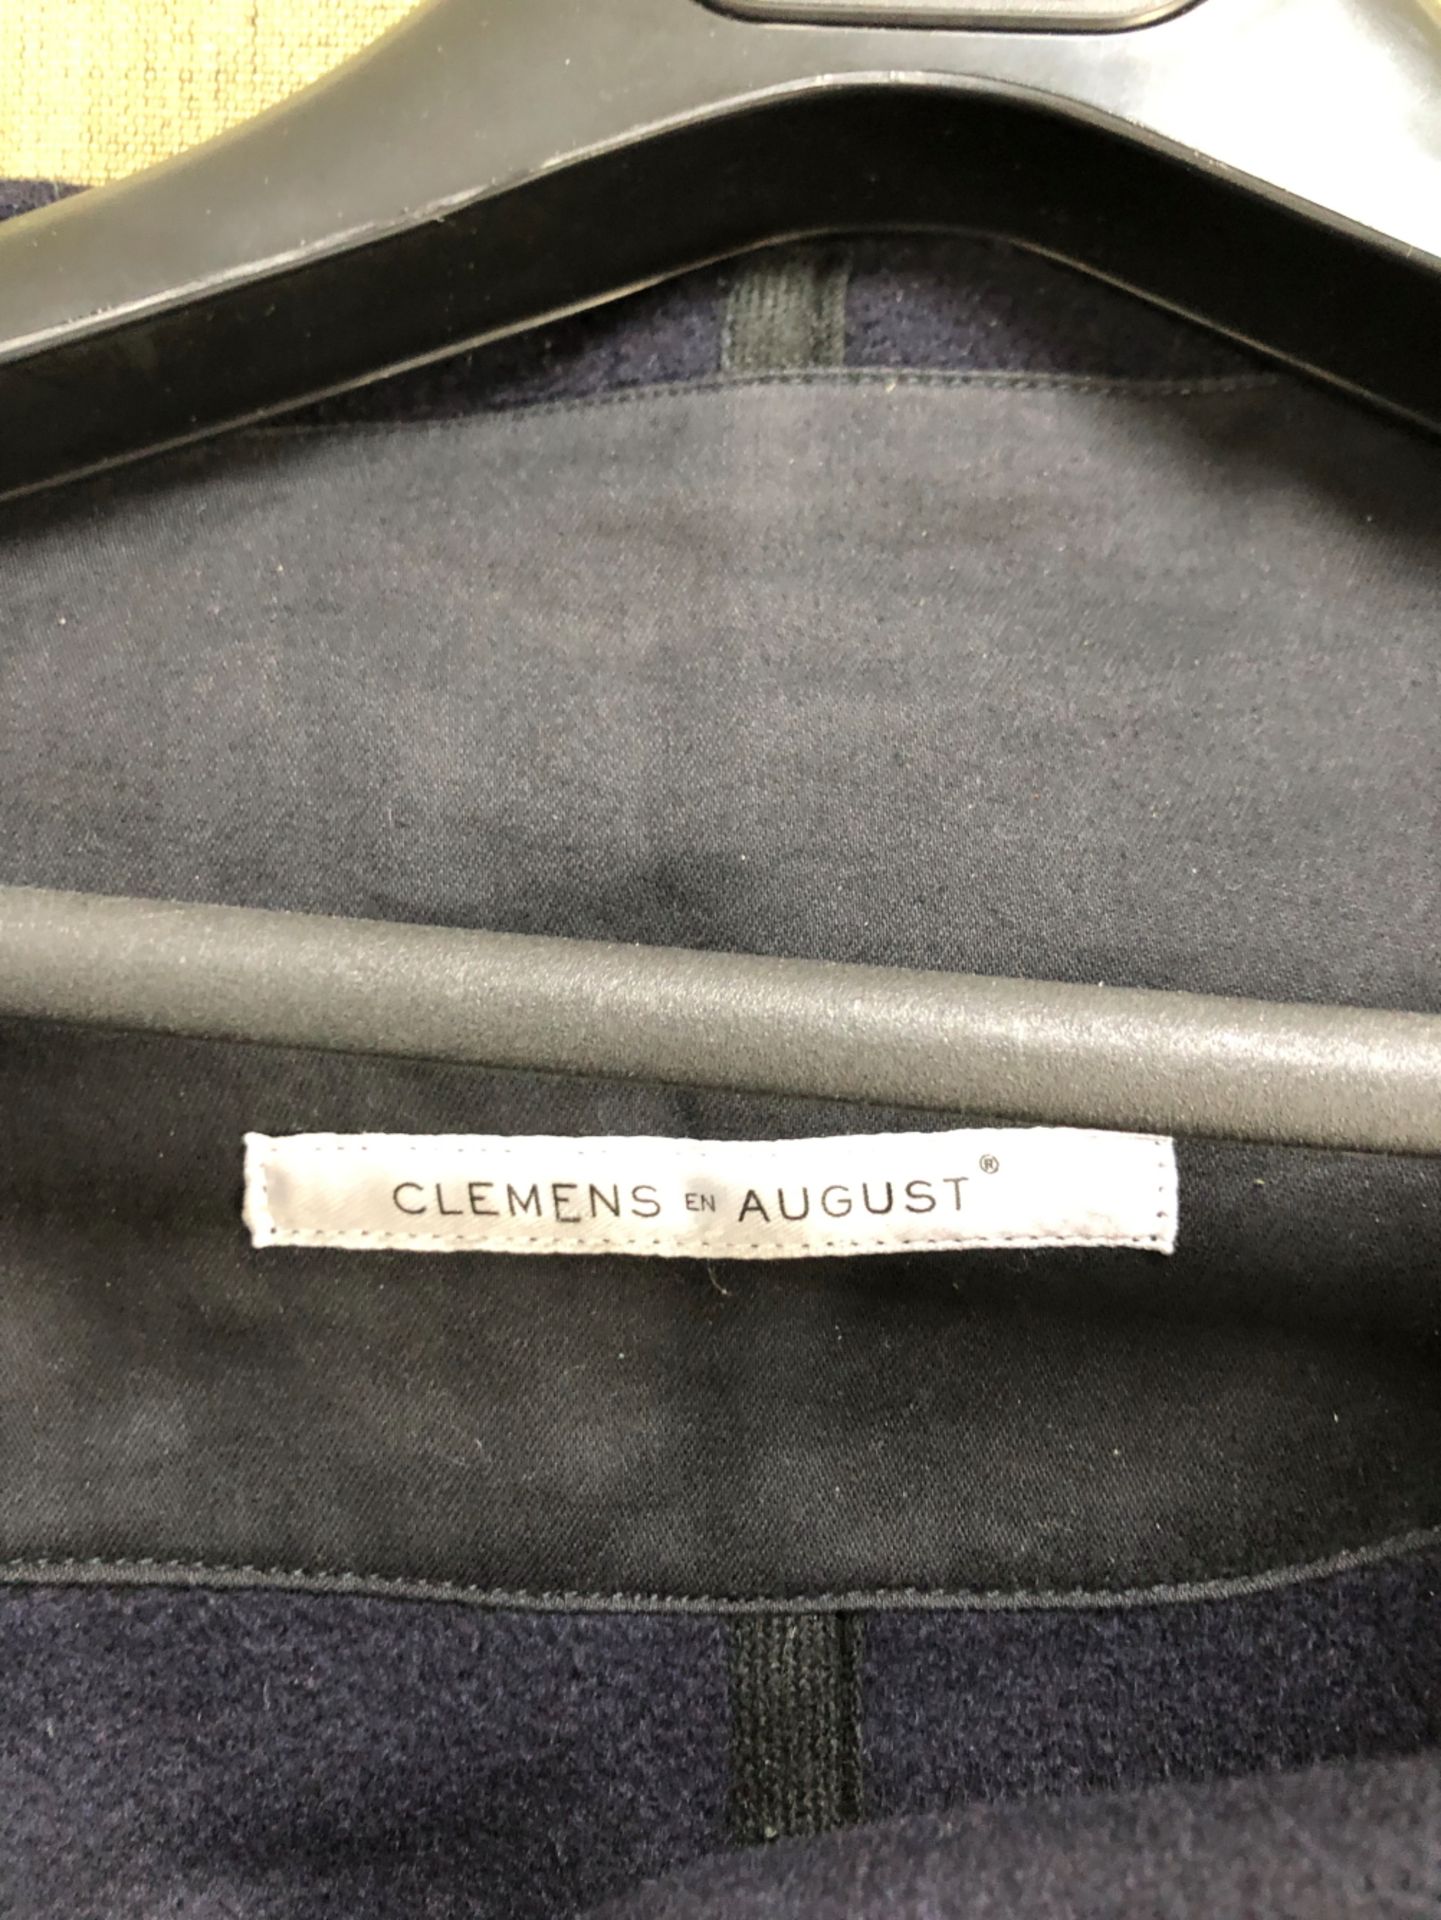 COAT: CLEMENS EN AUGUST NAVY BLUE CASHMERE AND LEATHER PANELS ON ARMS. LABEL STATES SIZE EUR 42. - Image 2 of 7